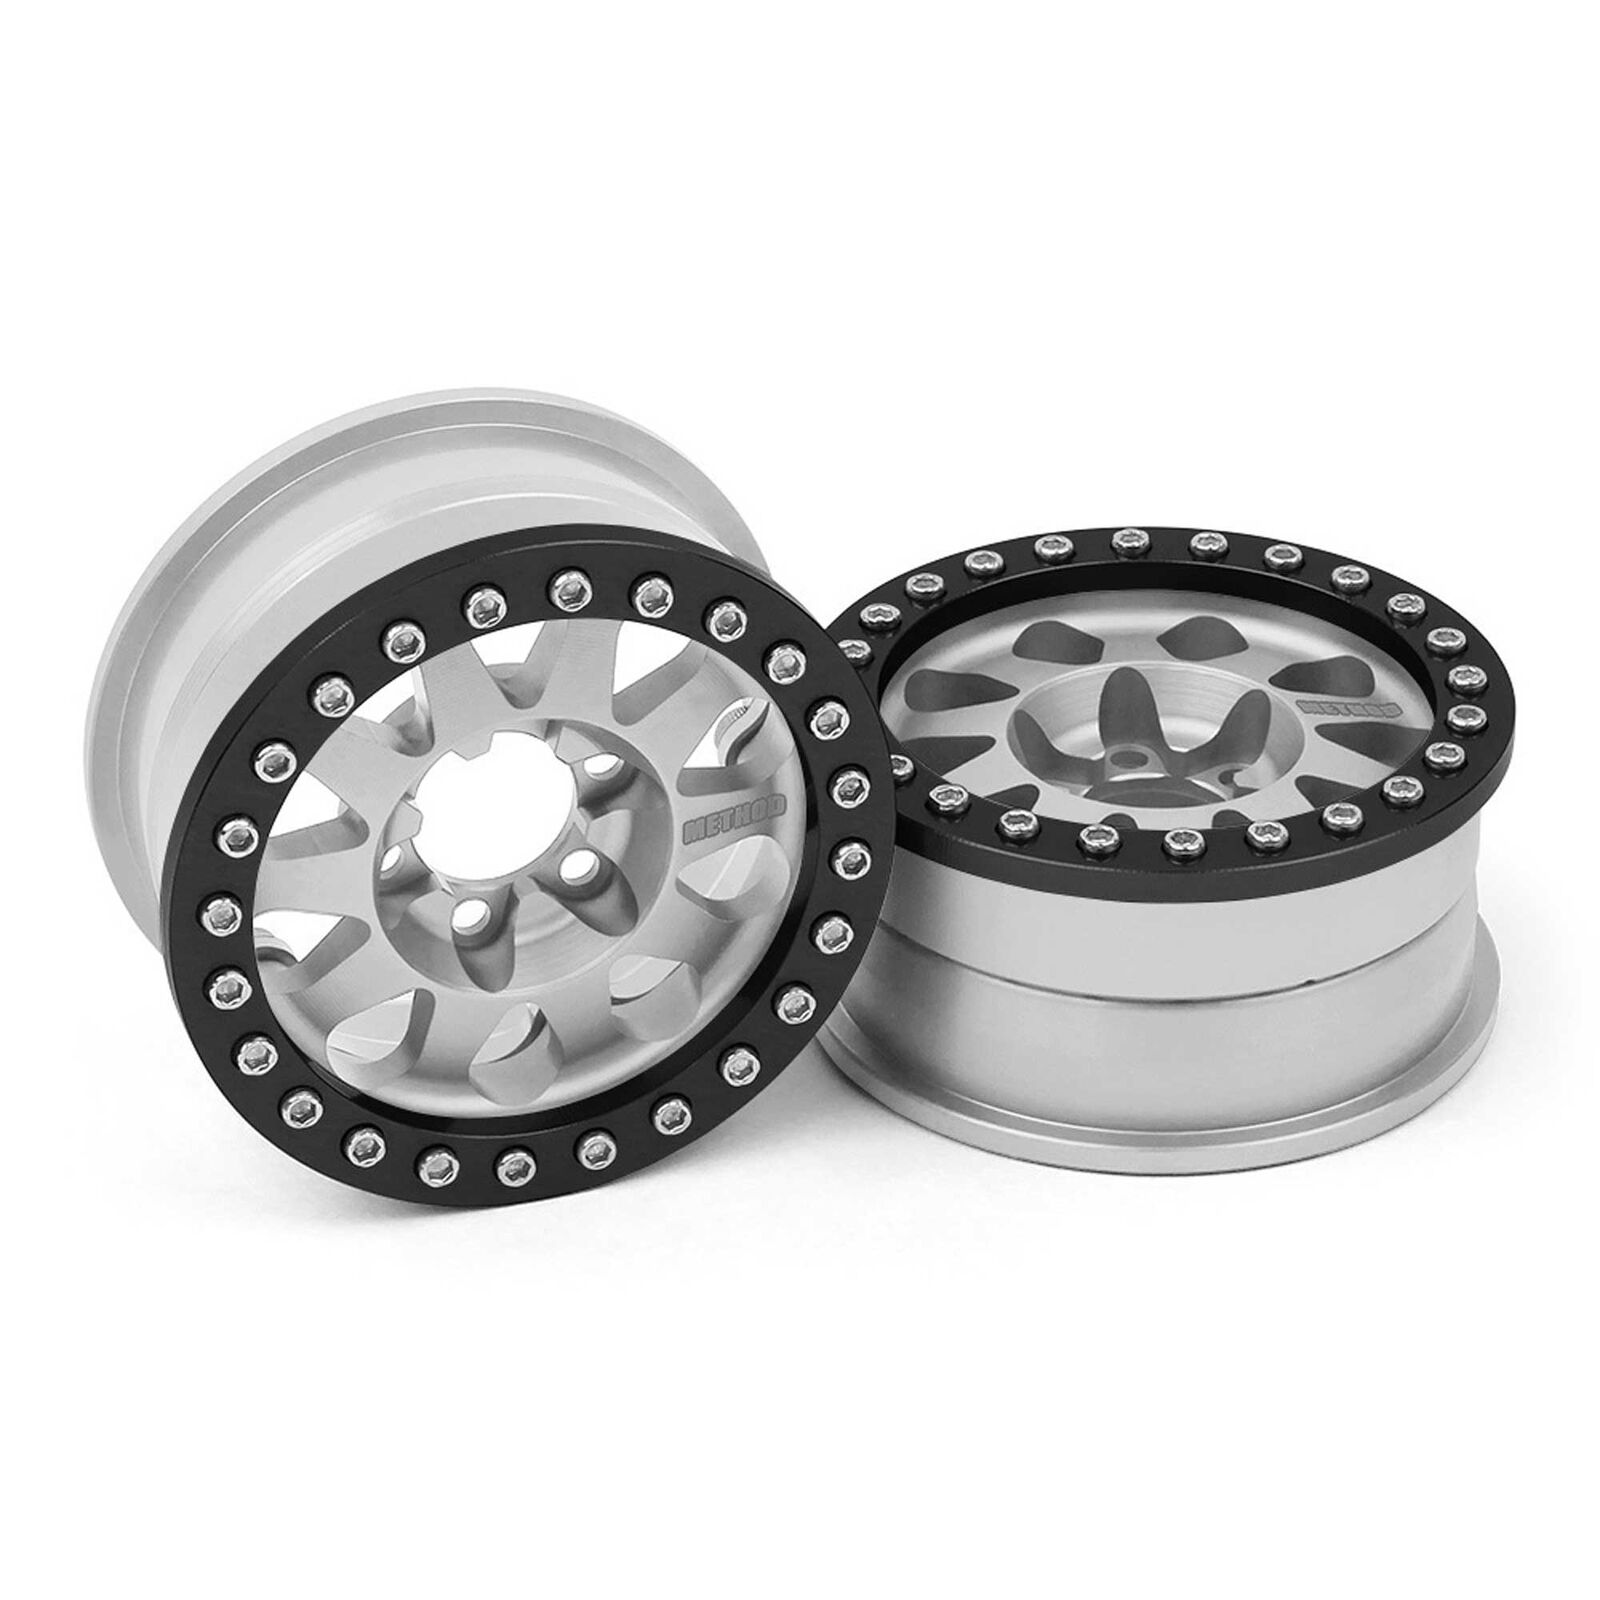 1/10 Method 101 V2 1.9 Race Crawler Wheels, 12mm Hex, Clear Anodized (2)